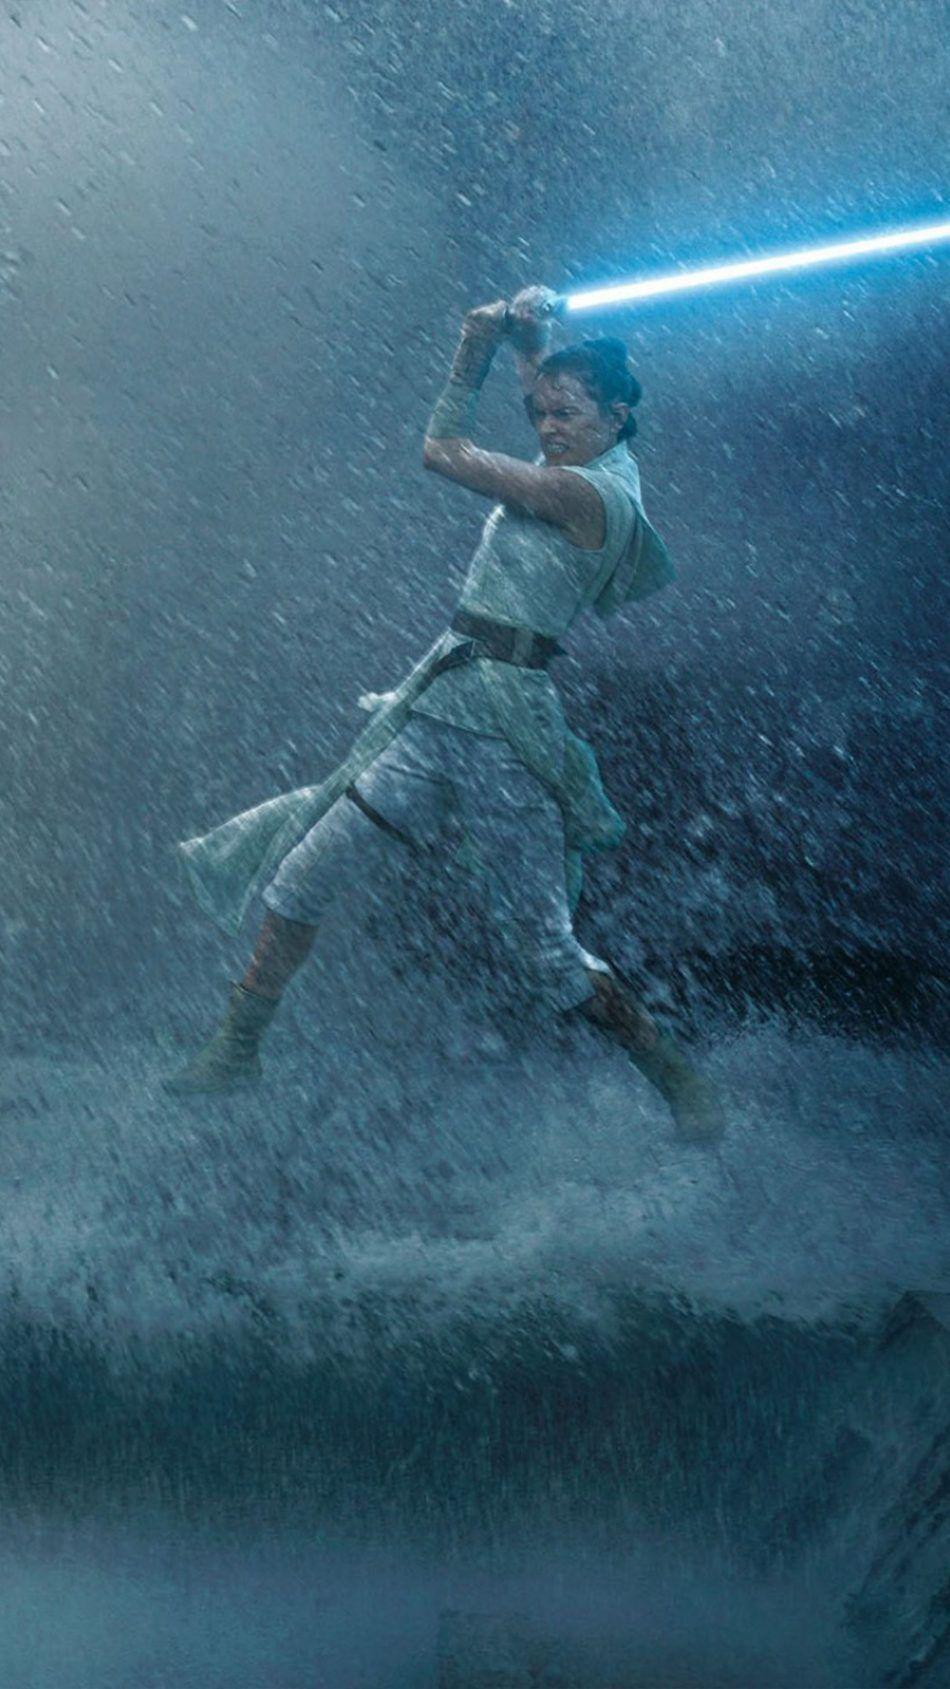 Daisy Ridley Fight In Star Wars The Rise of Skywalker. Movie